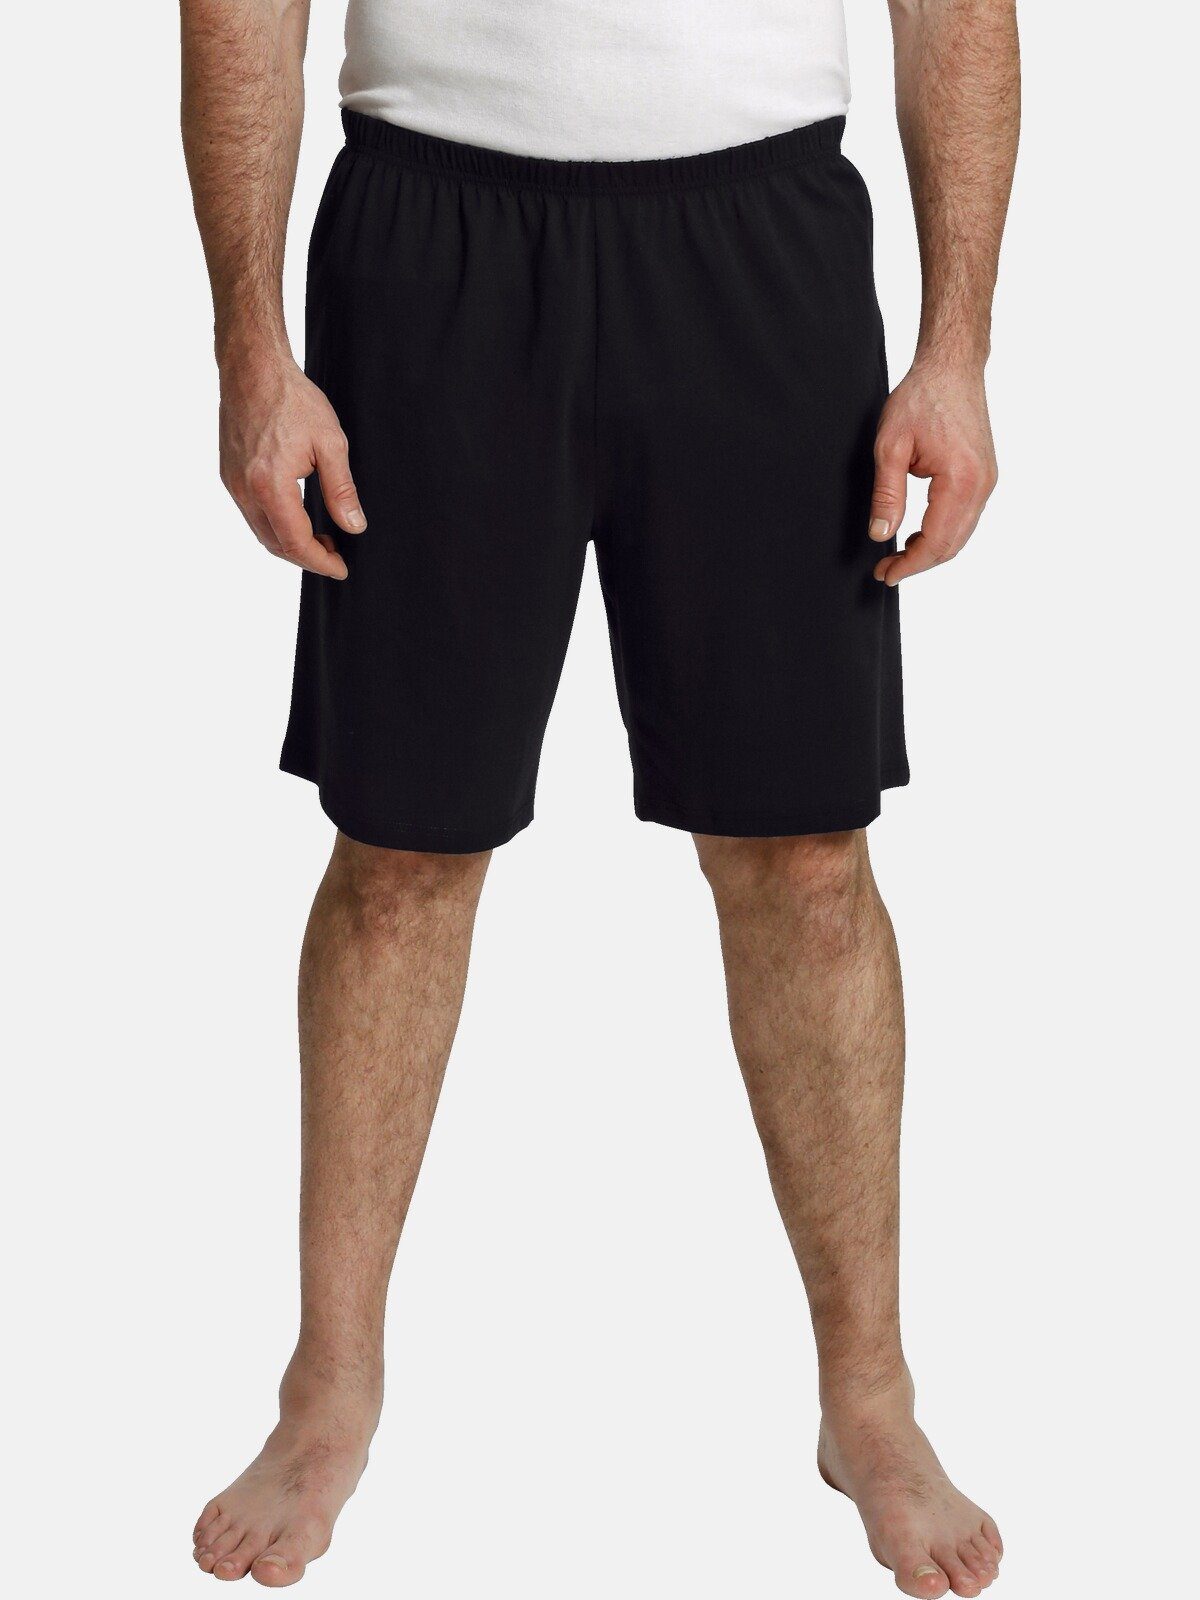 leichte Schlafhose bequeme Charles Colby Relaxshorts LORD schwarz MYCROFT